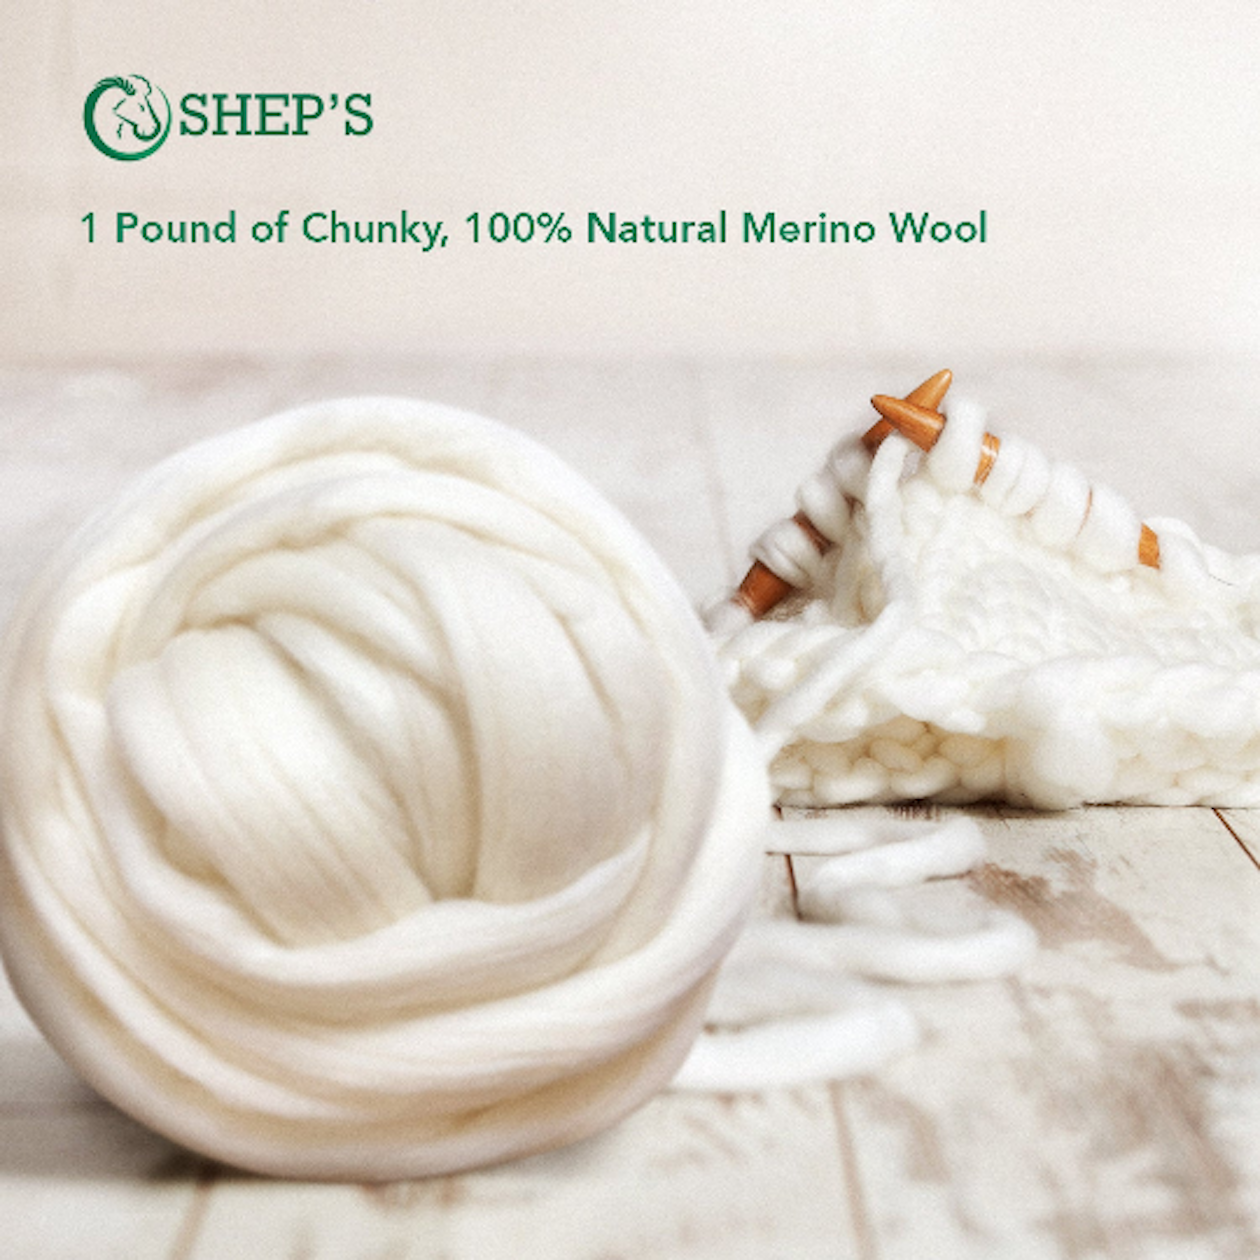 10 lbs Pounds White Wool Top DIY Roving Fiber Spinning, Make Your Own- Felting Crafts Large Chunky (Arm or PVC) Knit Throw Blanket USA -Sale